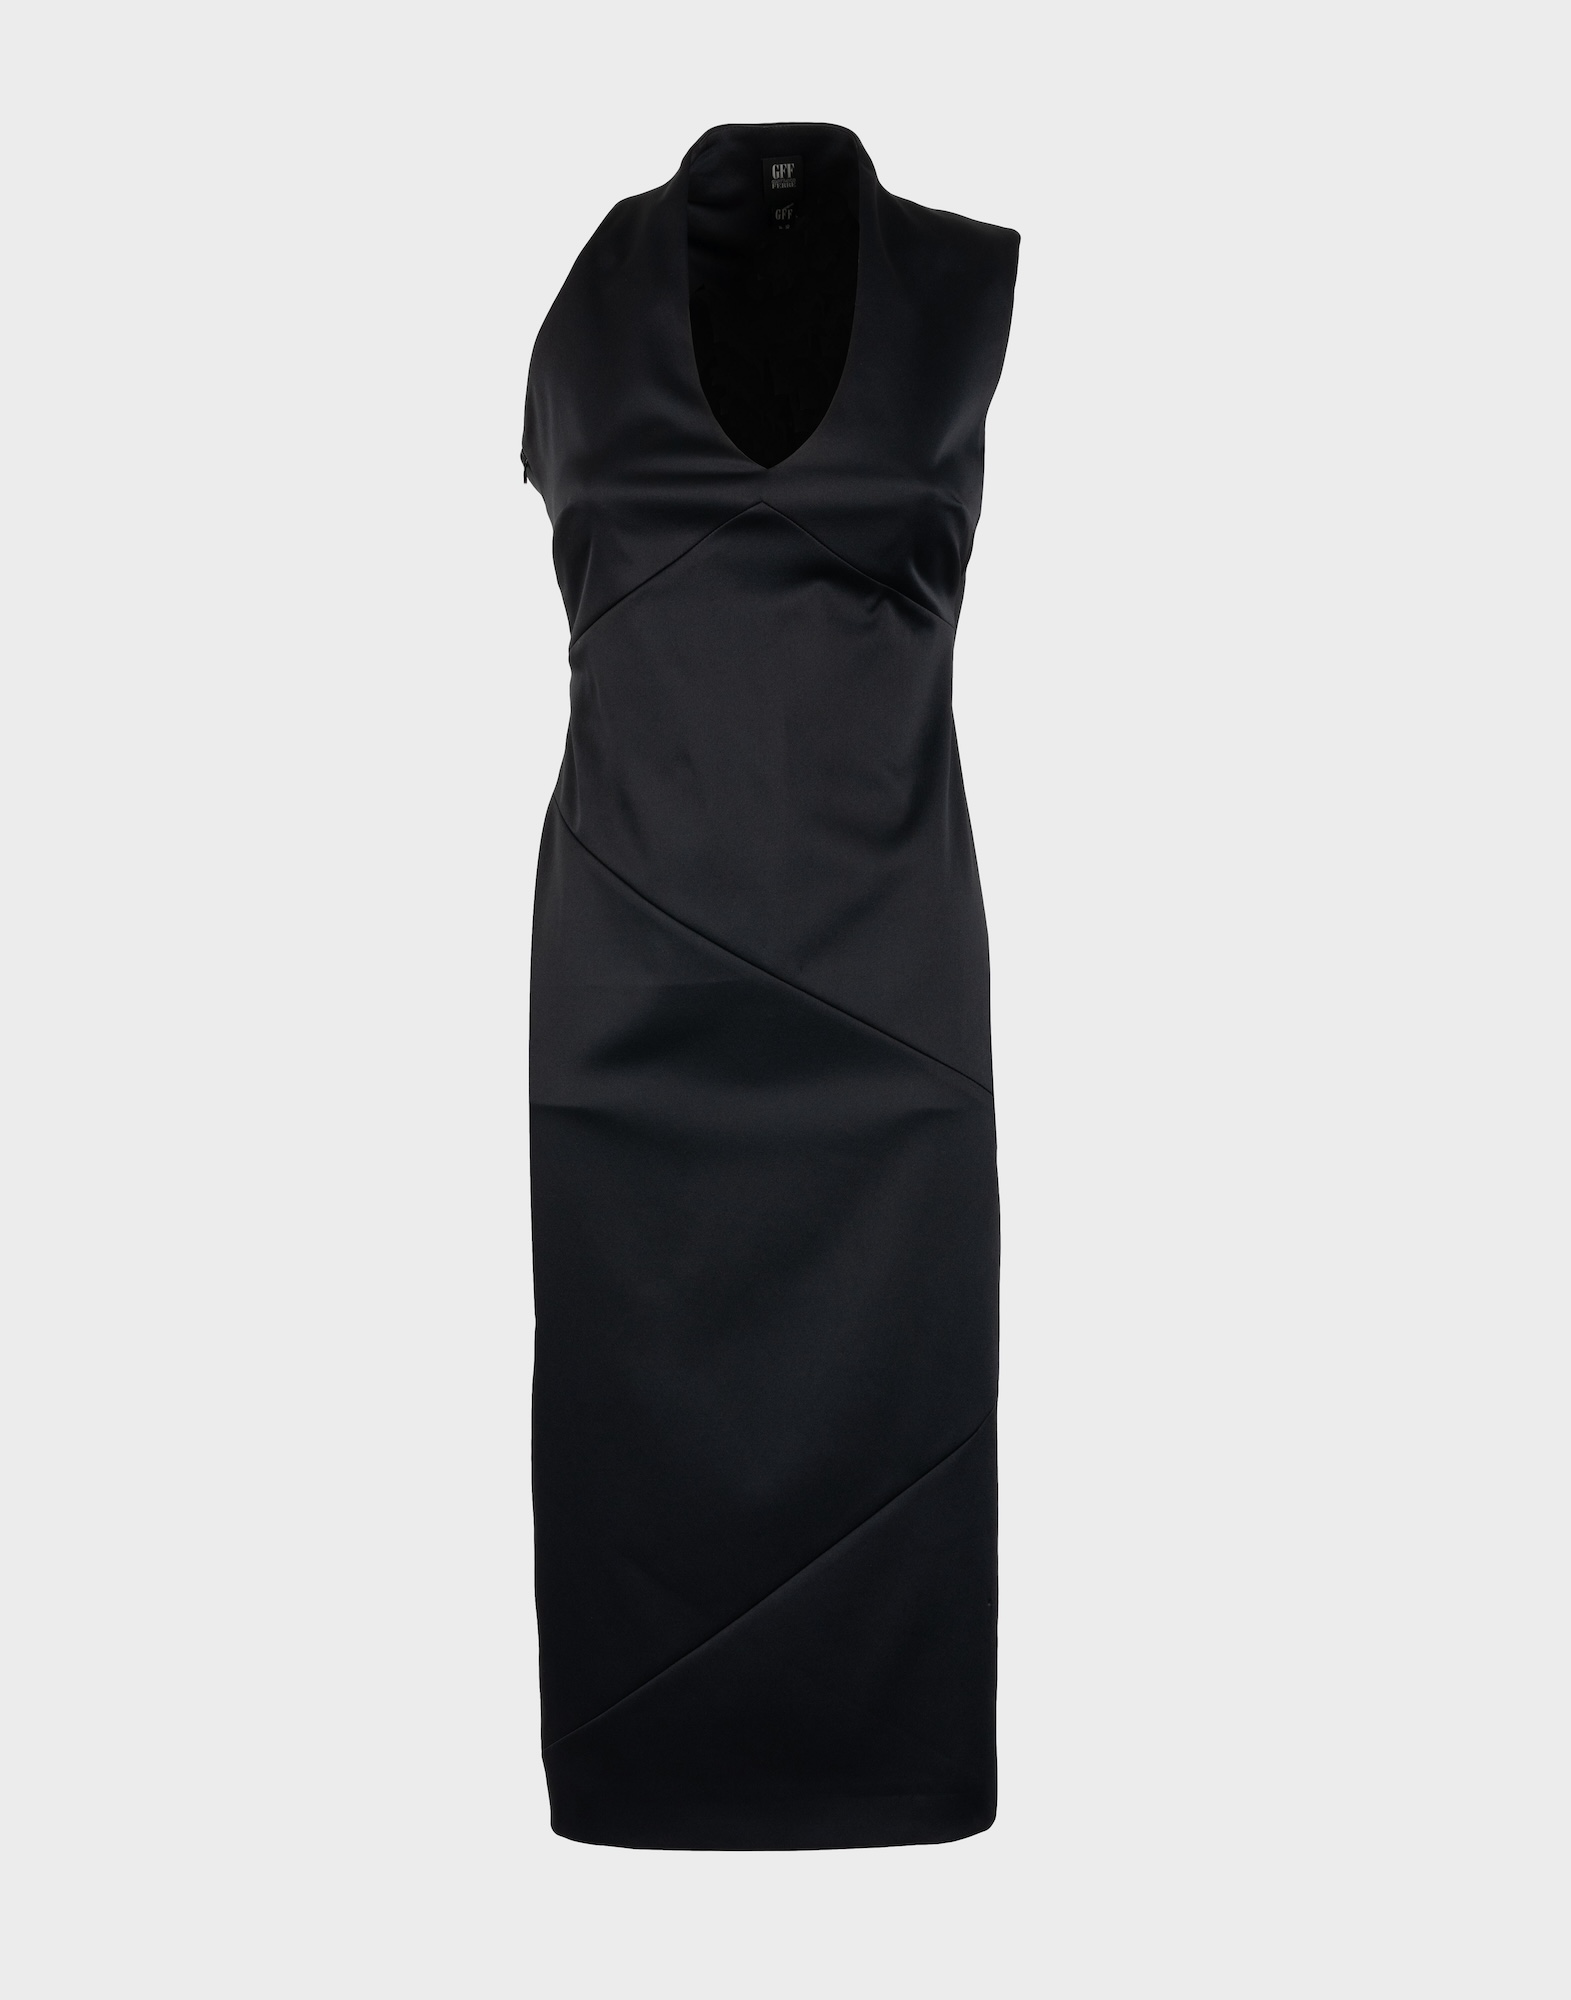 women's calf-length black sleeveless dress with teardrop neckline at the front